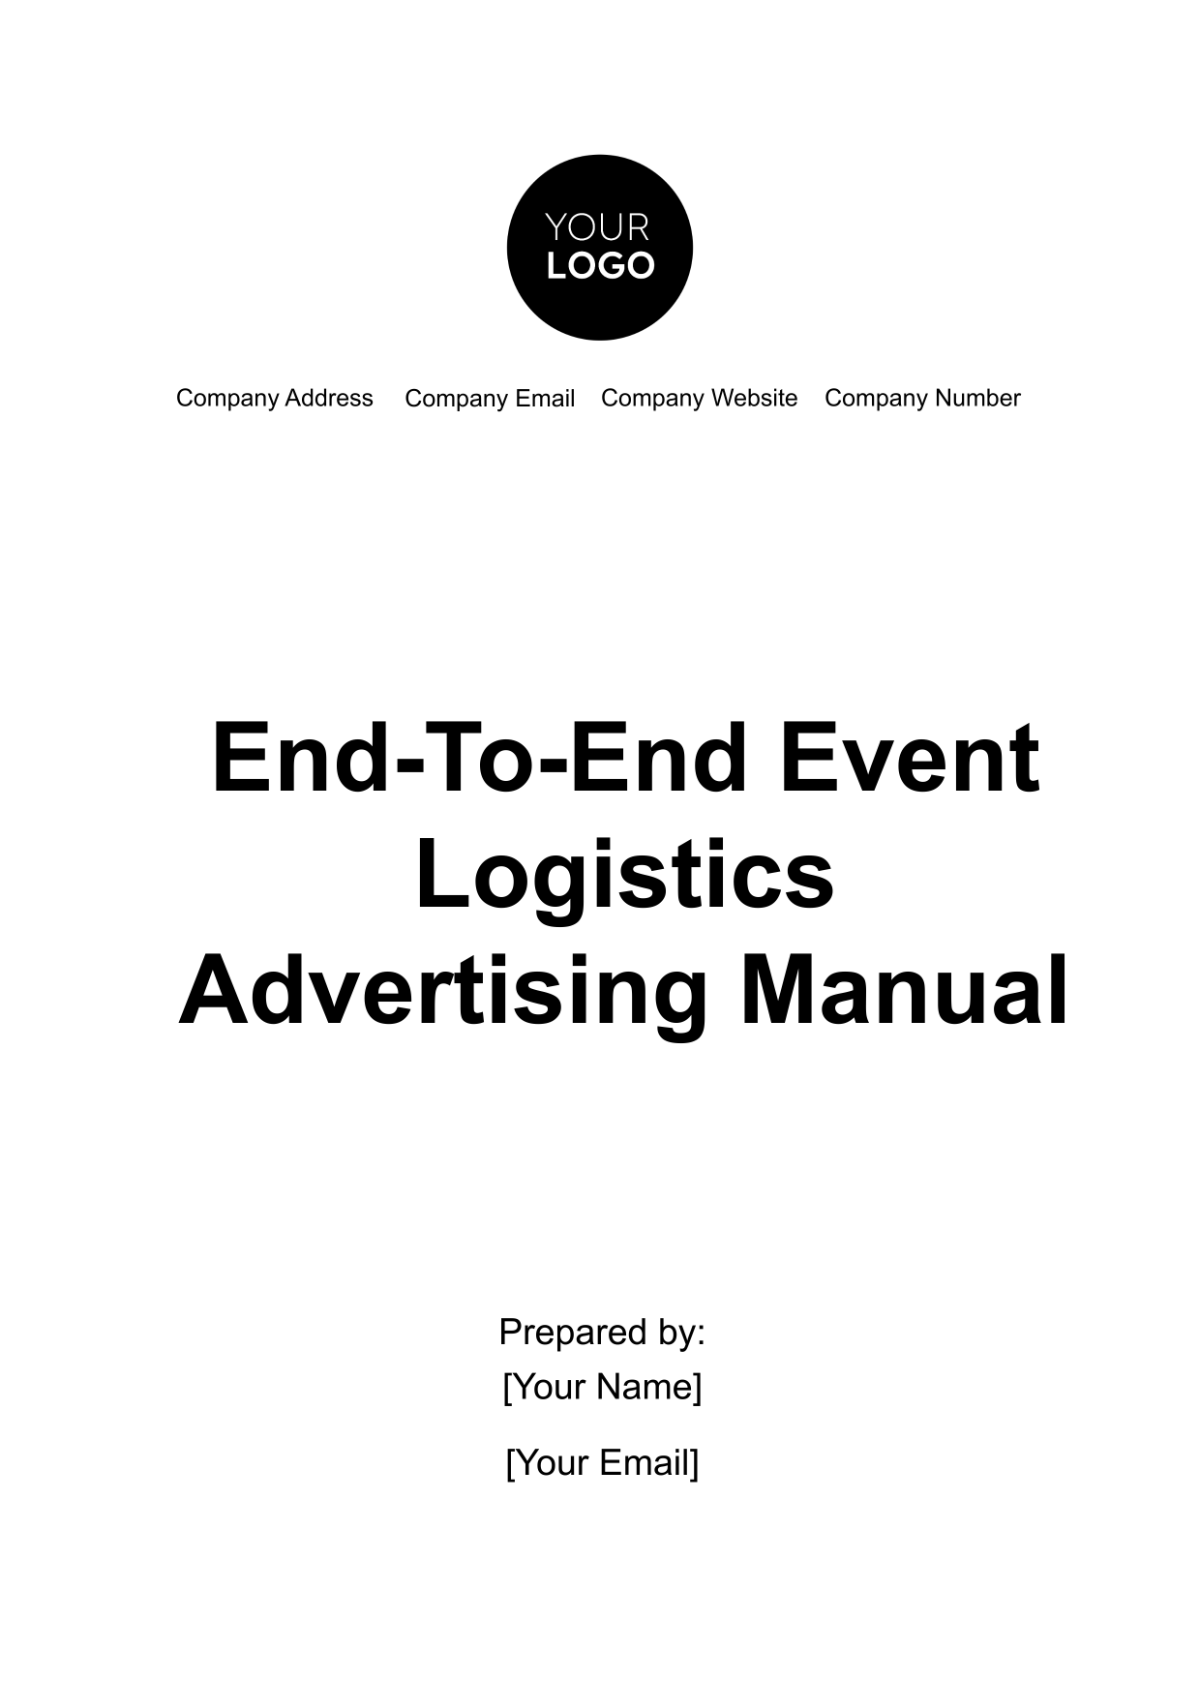 End-to-End Event Logistics Advertising Manual Template